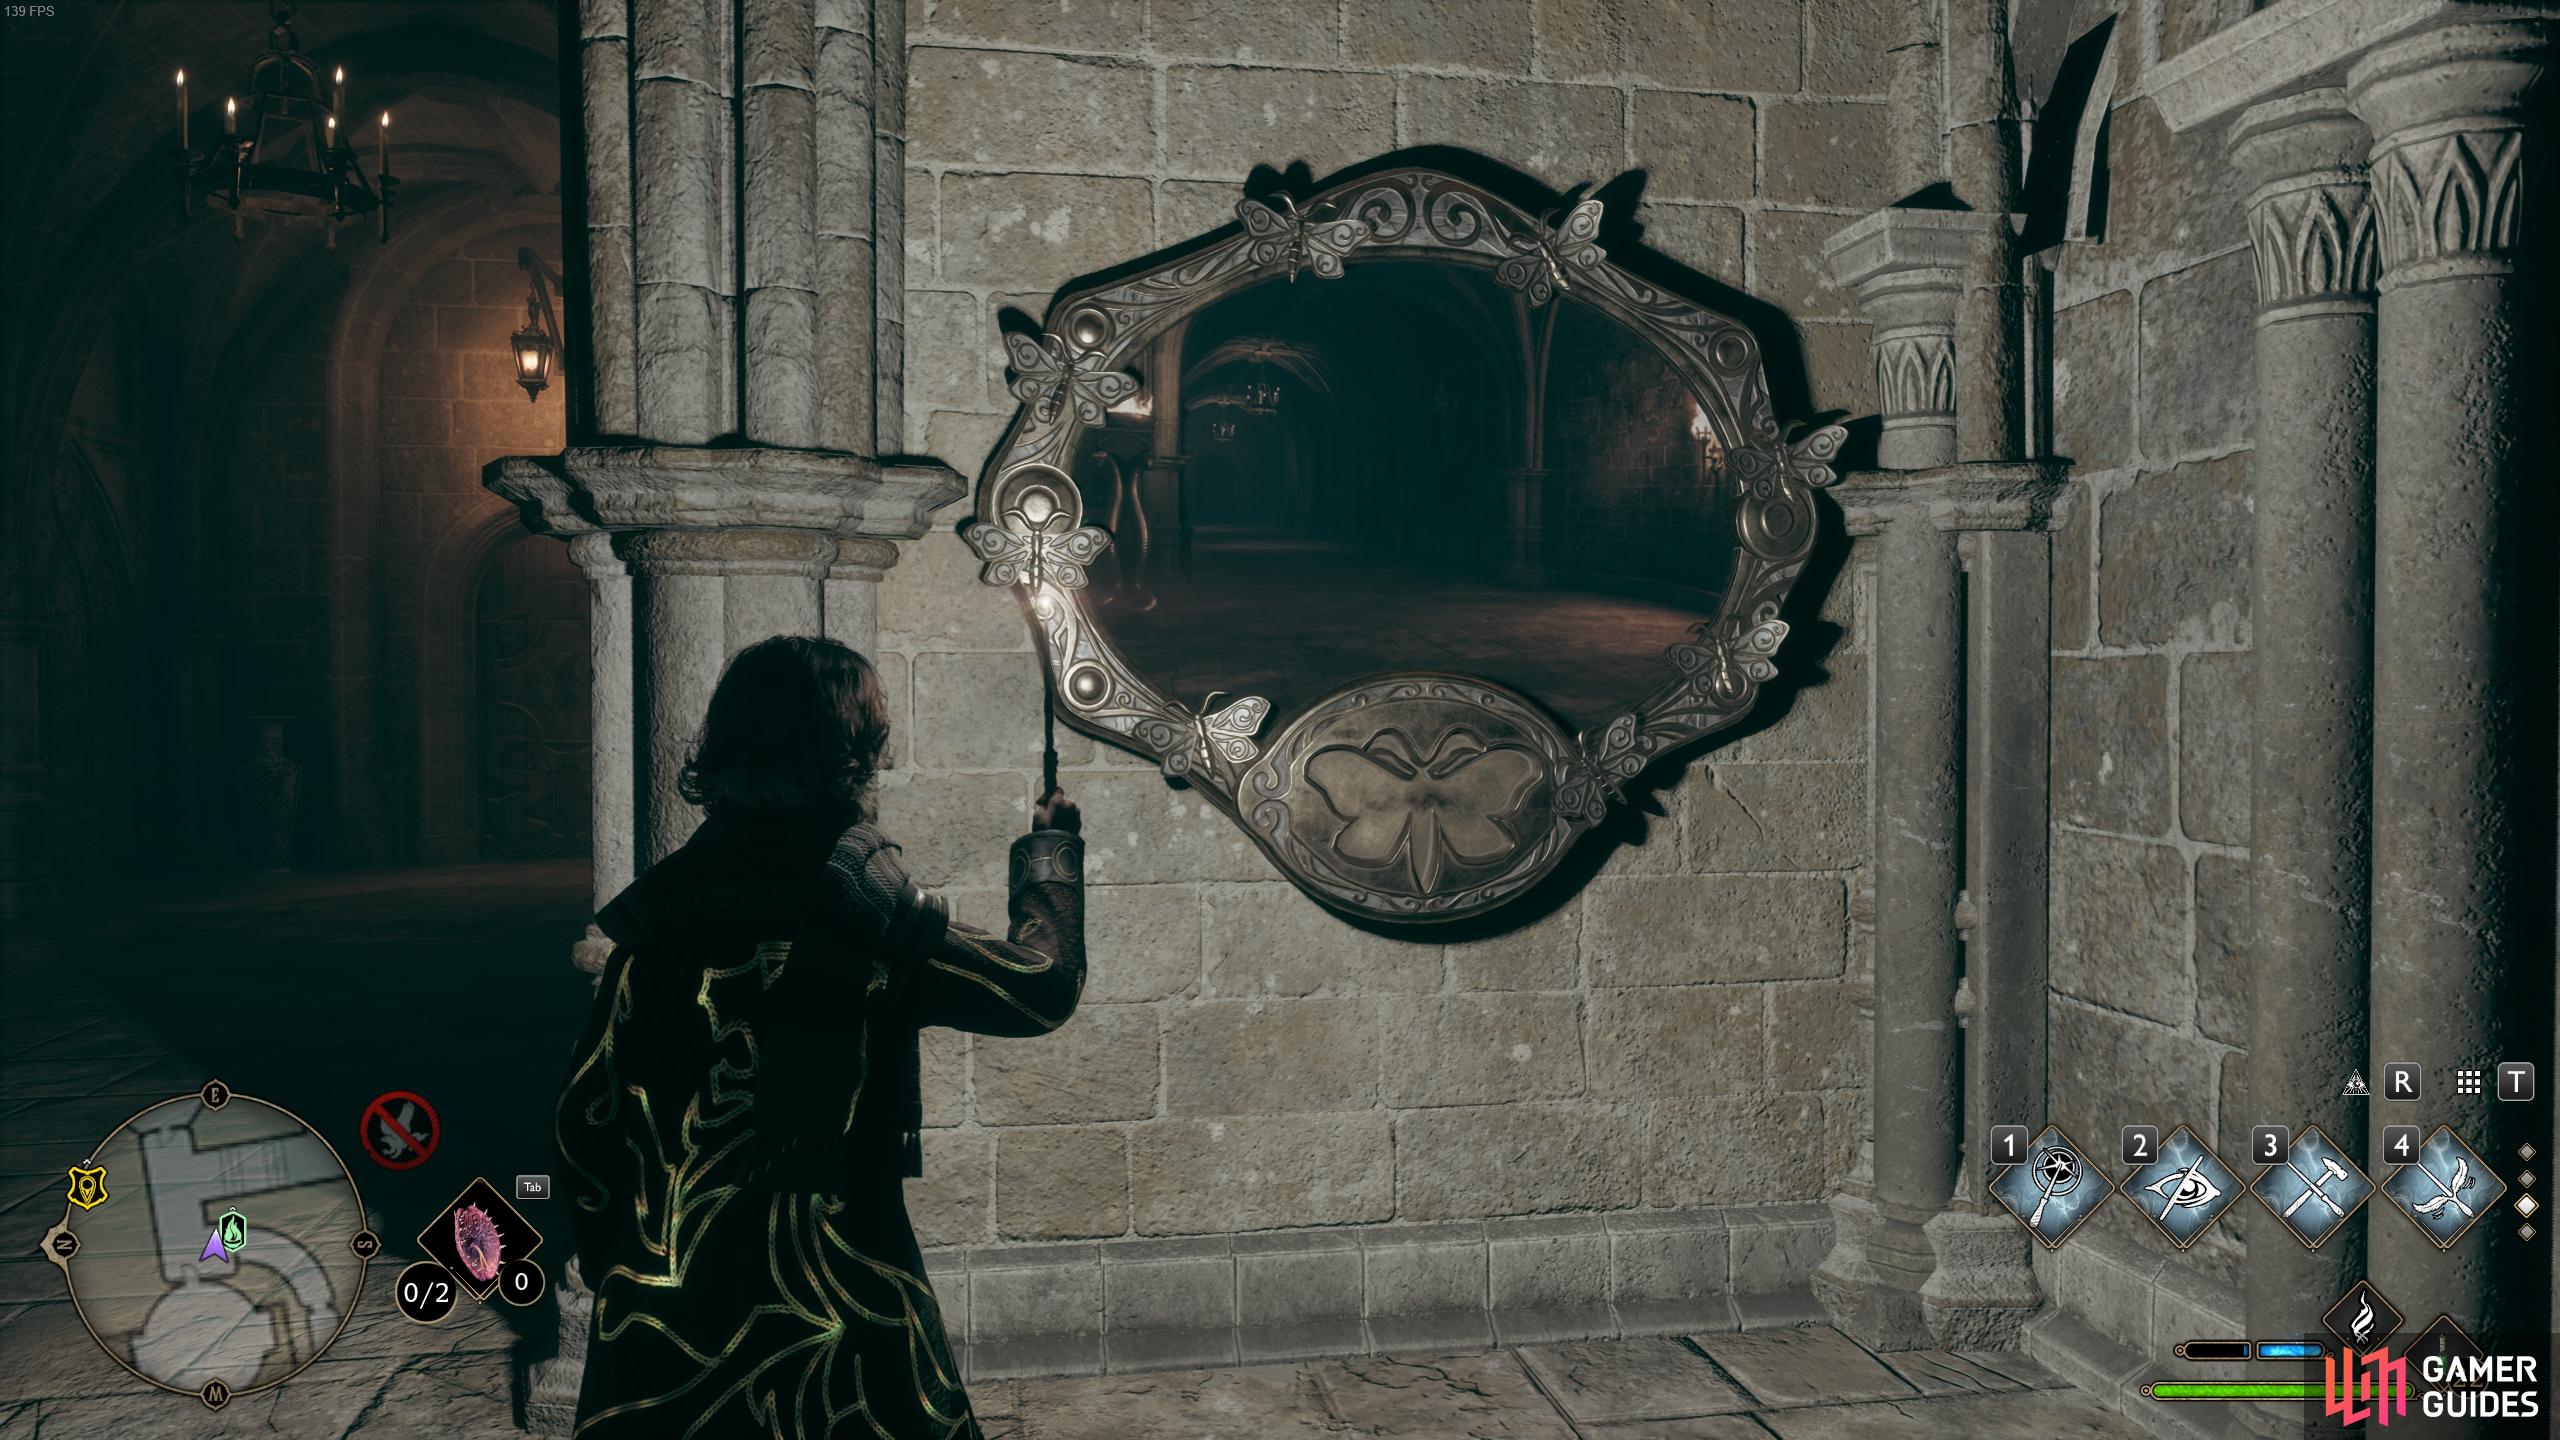 Cast Lumos in front of the mirror to reveal the location of the moth.